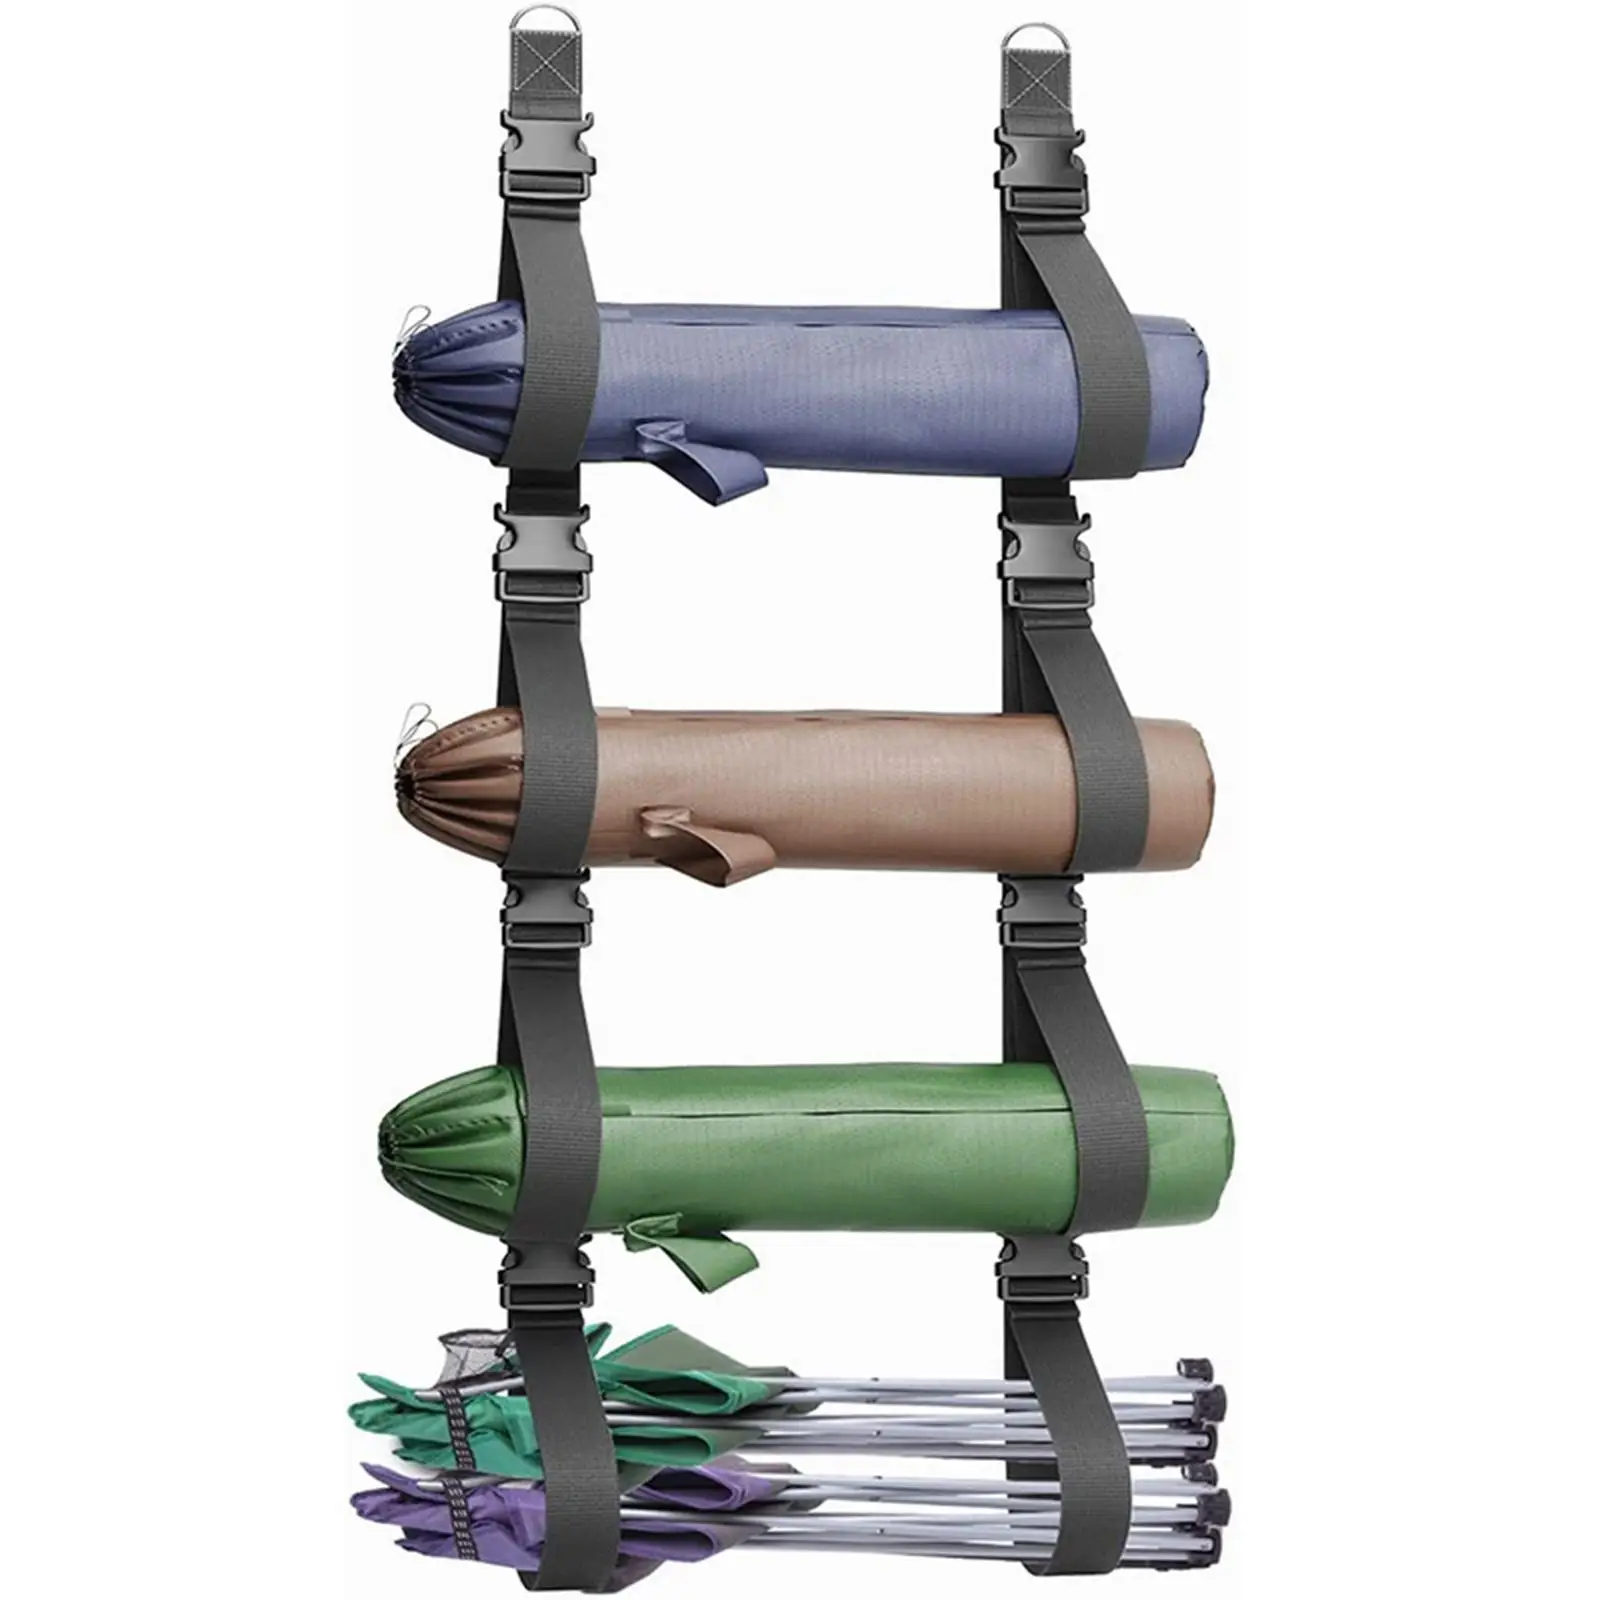 Wall Storage Straps Holds 4 Chairs Camping Chair Storage Rack Hanging Holder for Yoga Mats Canopy Folded Chairs Beach Chairs